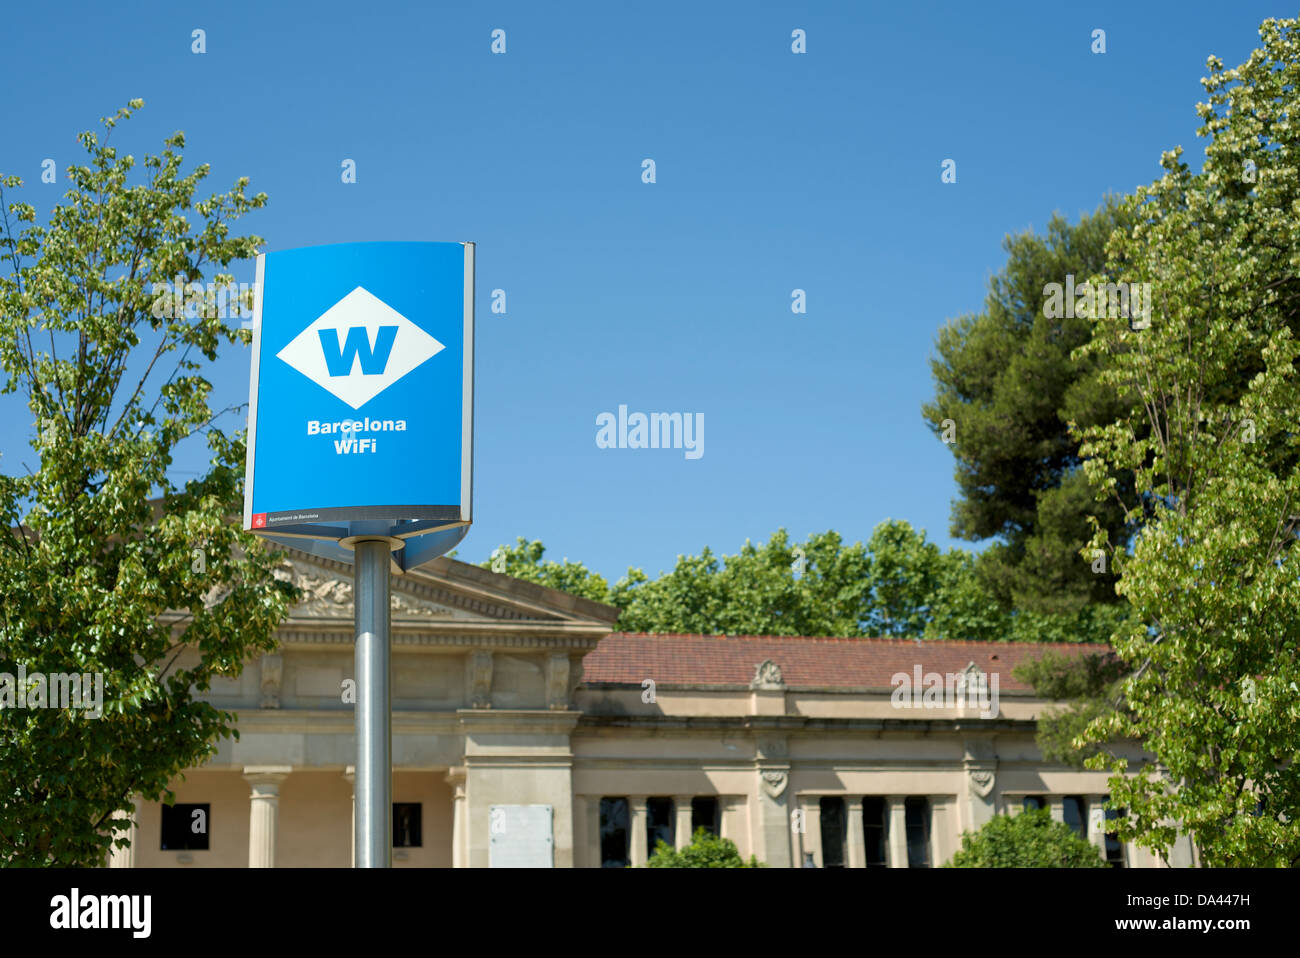 Sign post for public wi-fi hotspot in Barcelona, Spain Stock Photo